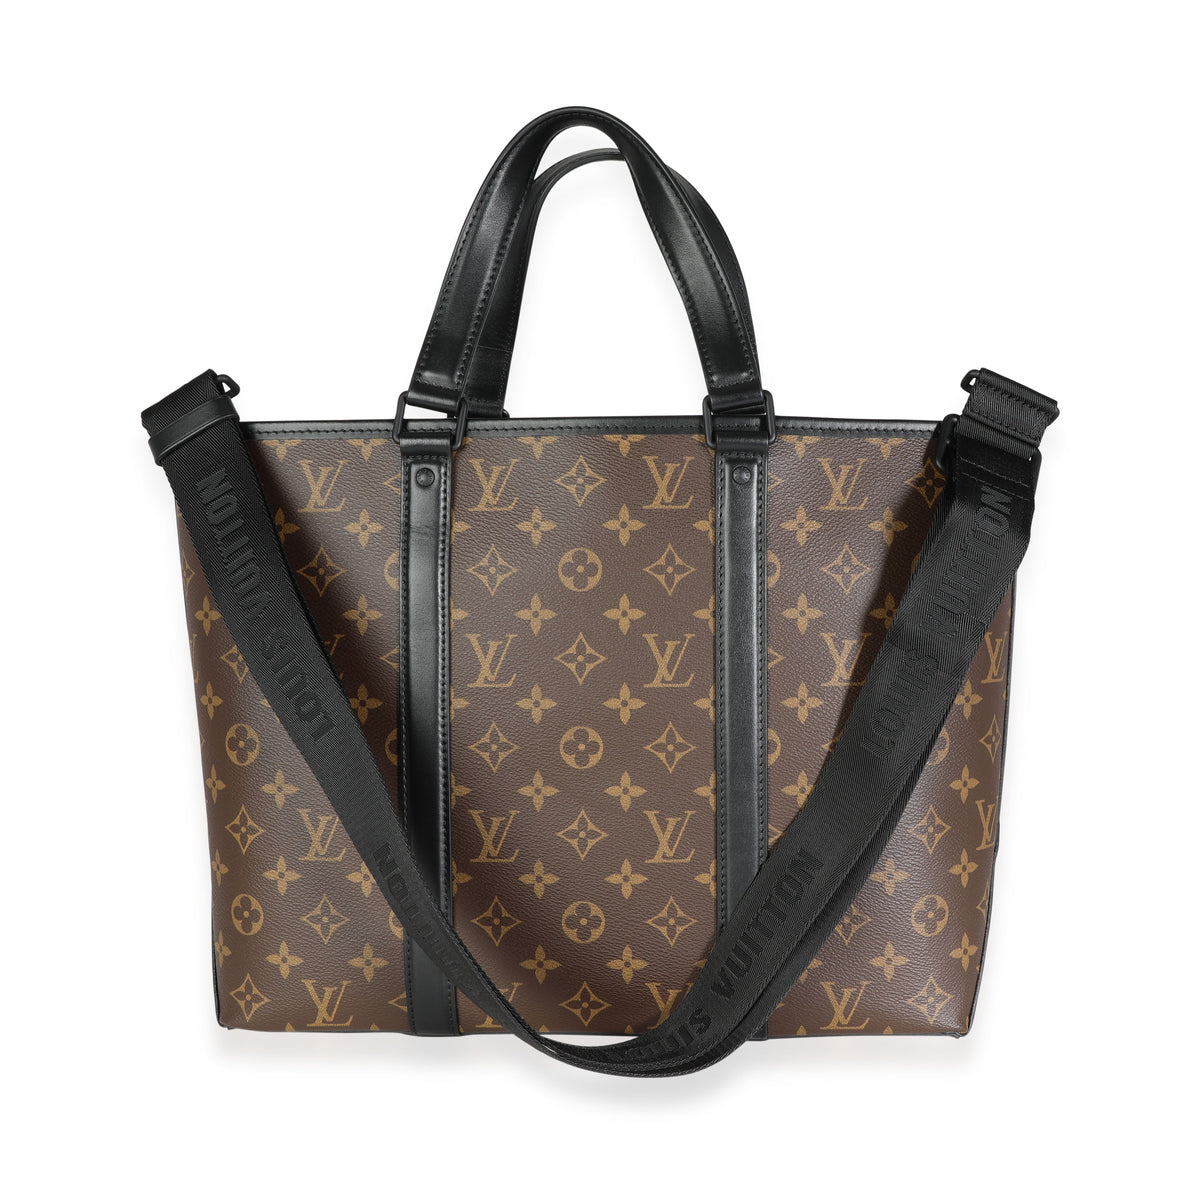 Shop Louis Vuitton Weekend Tote NM (M22537) by sweetピヨ